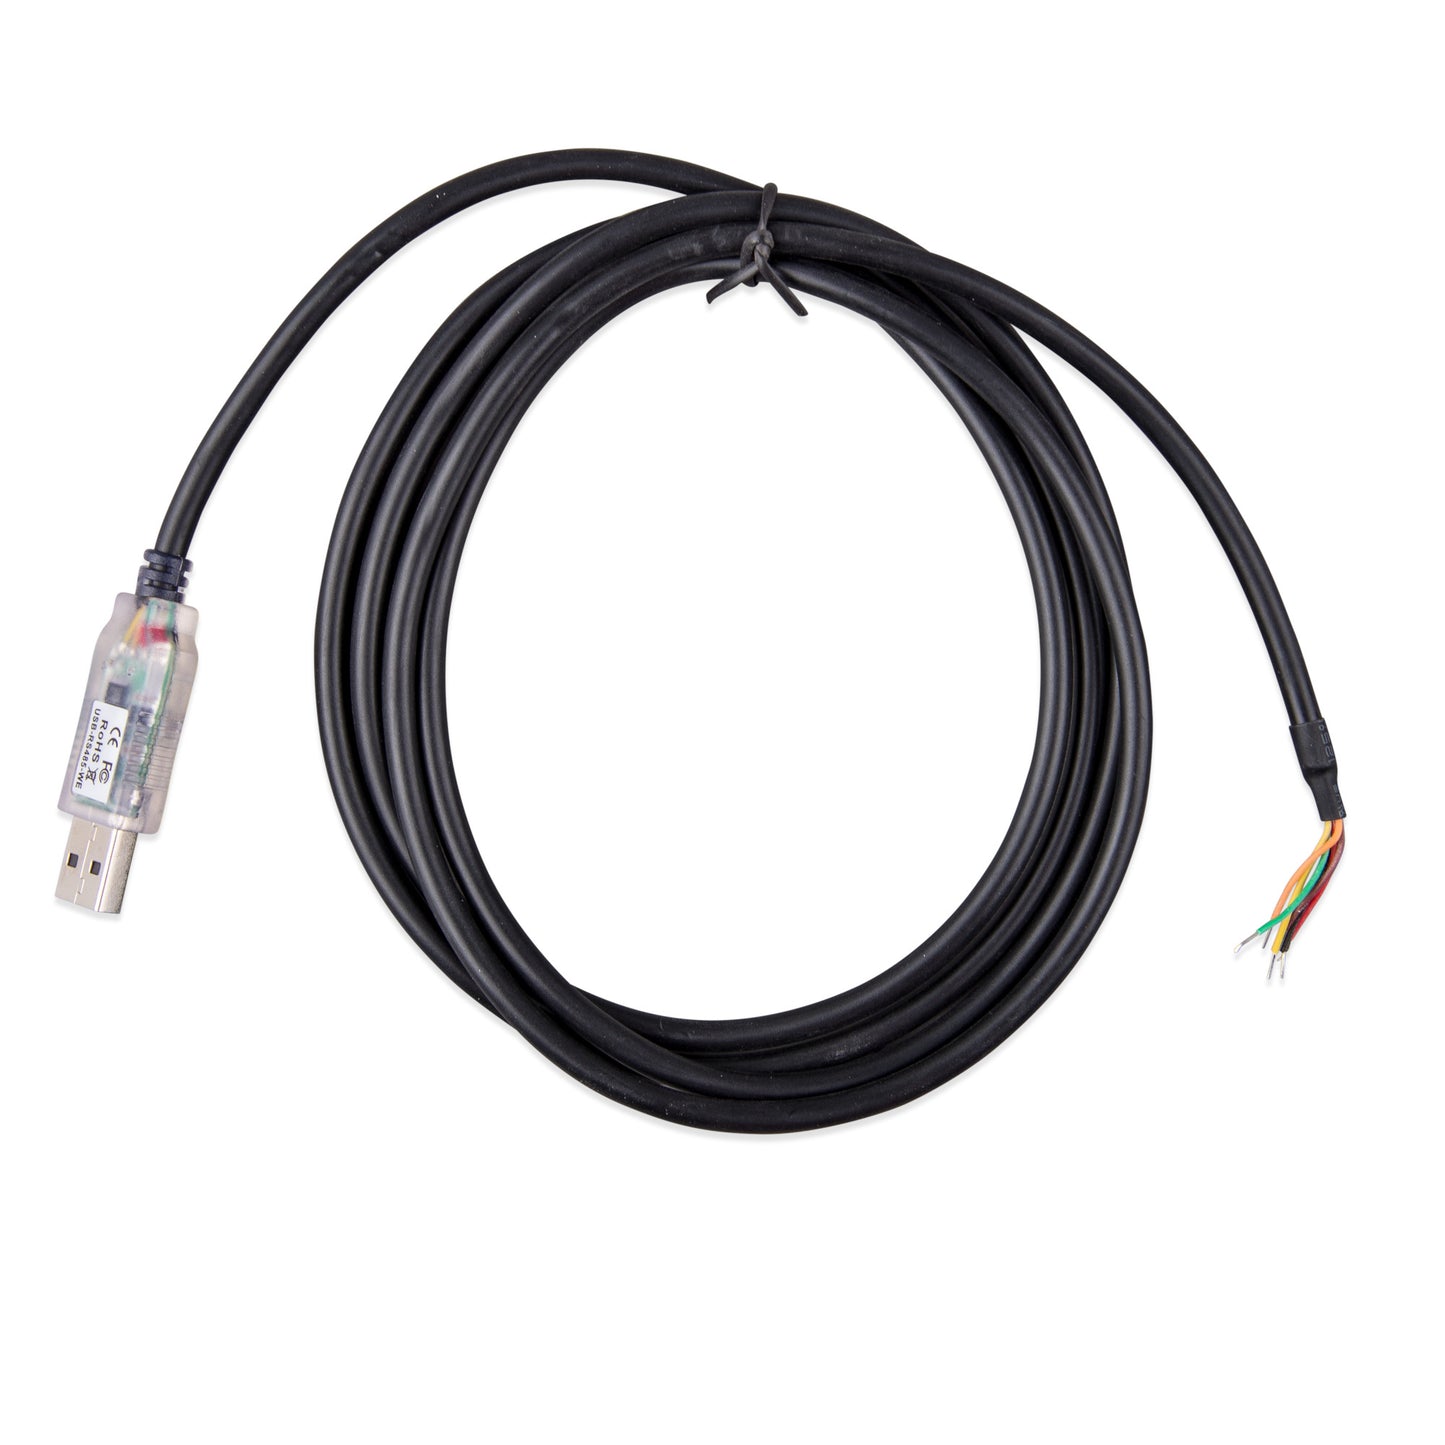 RS485 to USB interface cable - Victron Energy